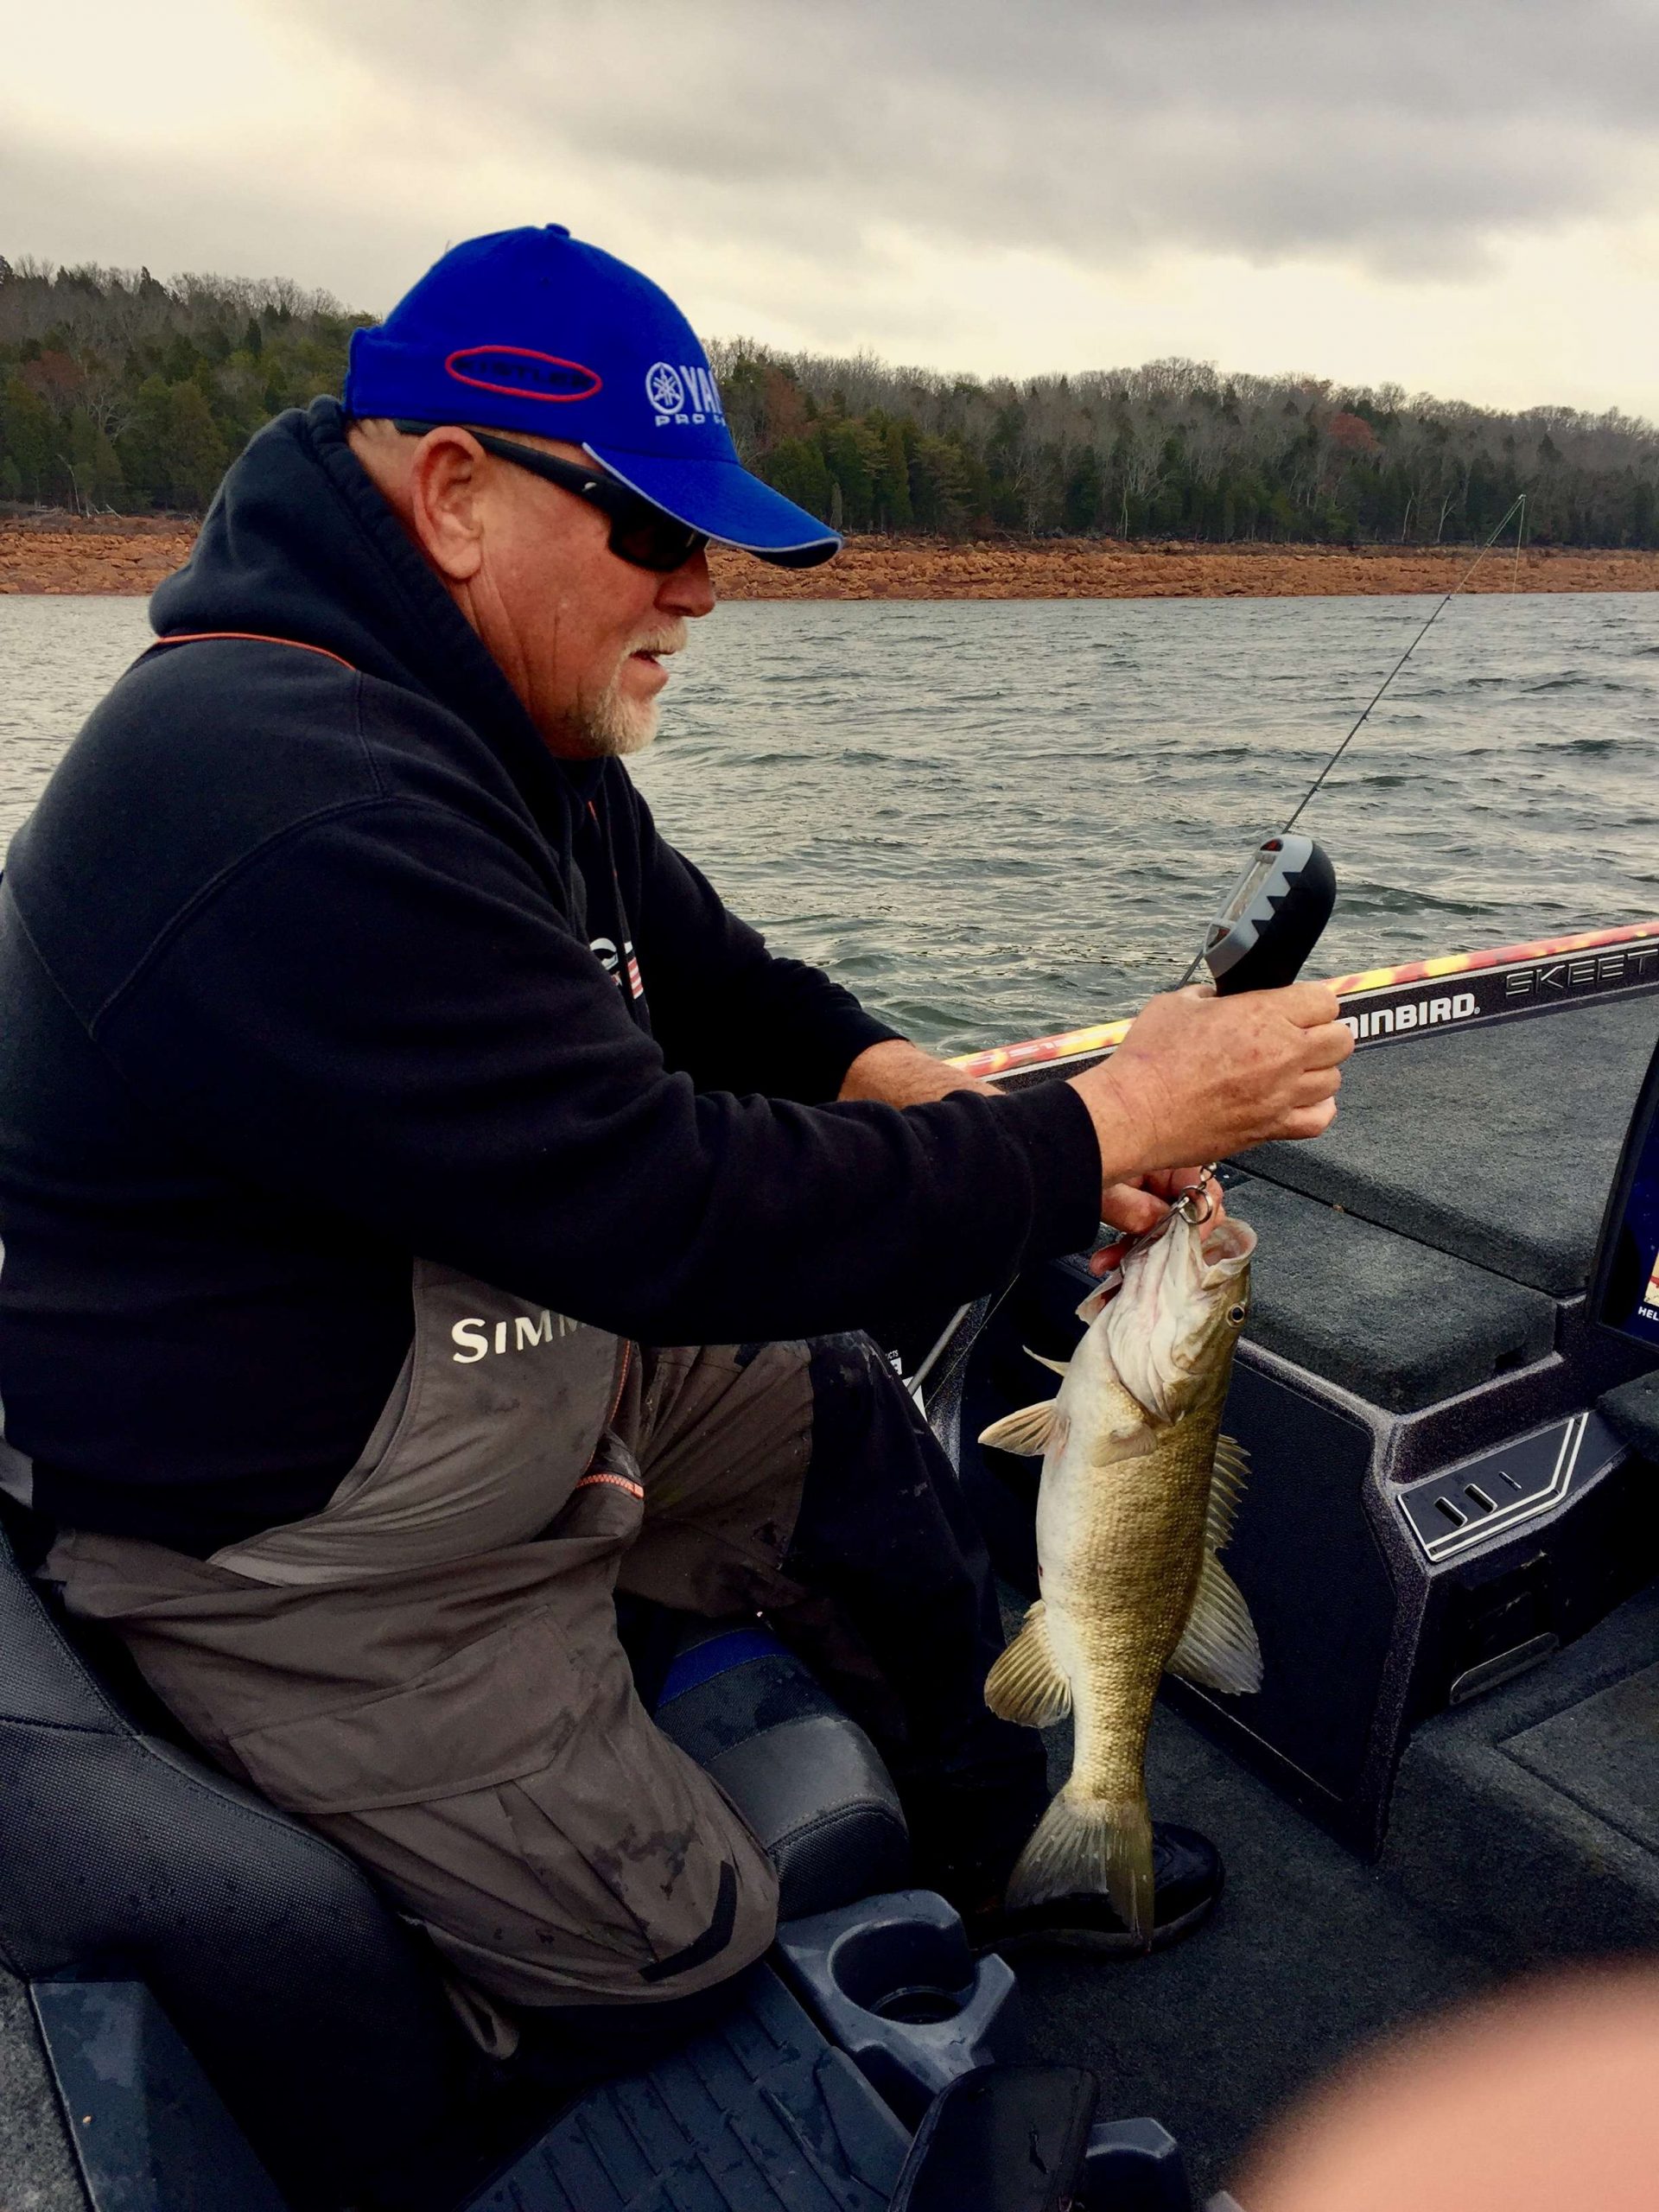 Matt Herren is in deep concentration . The mood has lightened but he is still concentrating hard to upgrade the weight to his five-fish limit.